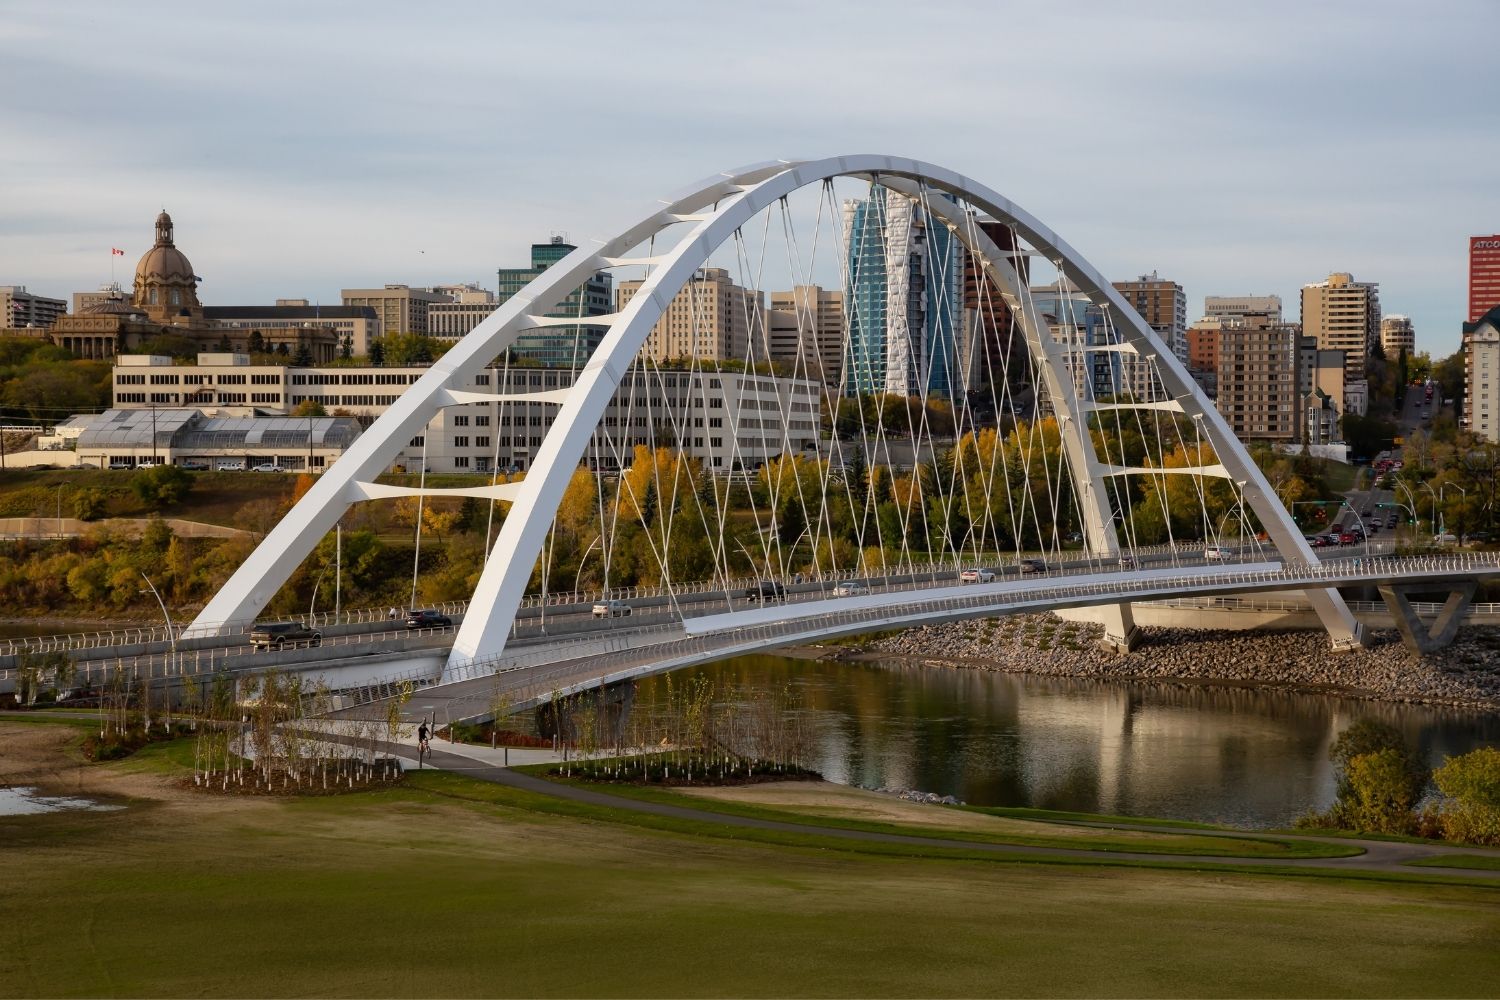 Where to Stay in Edmonton